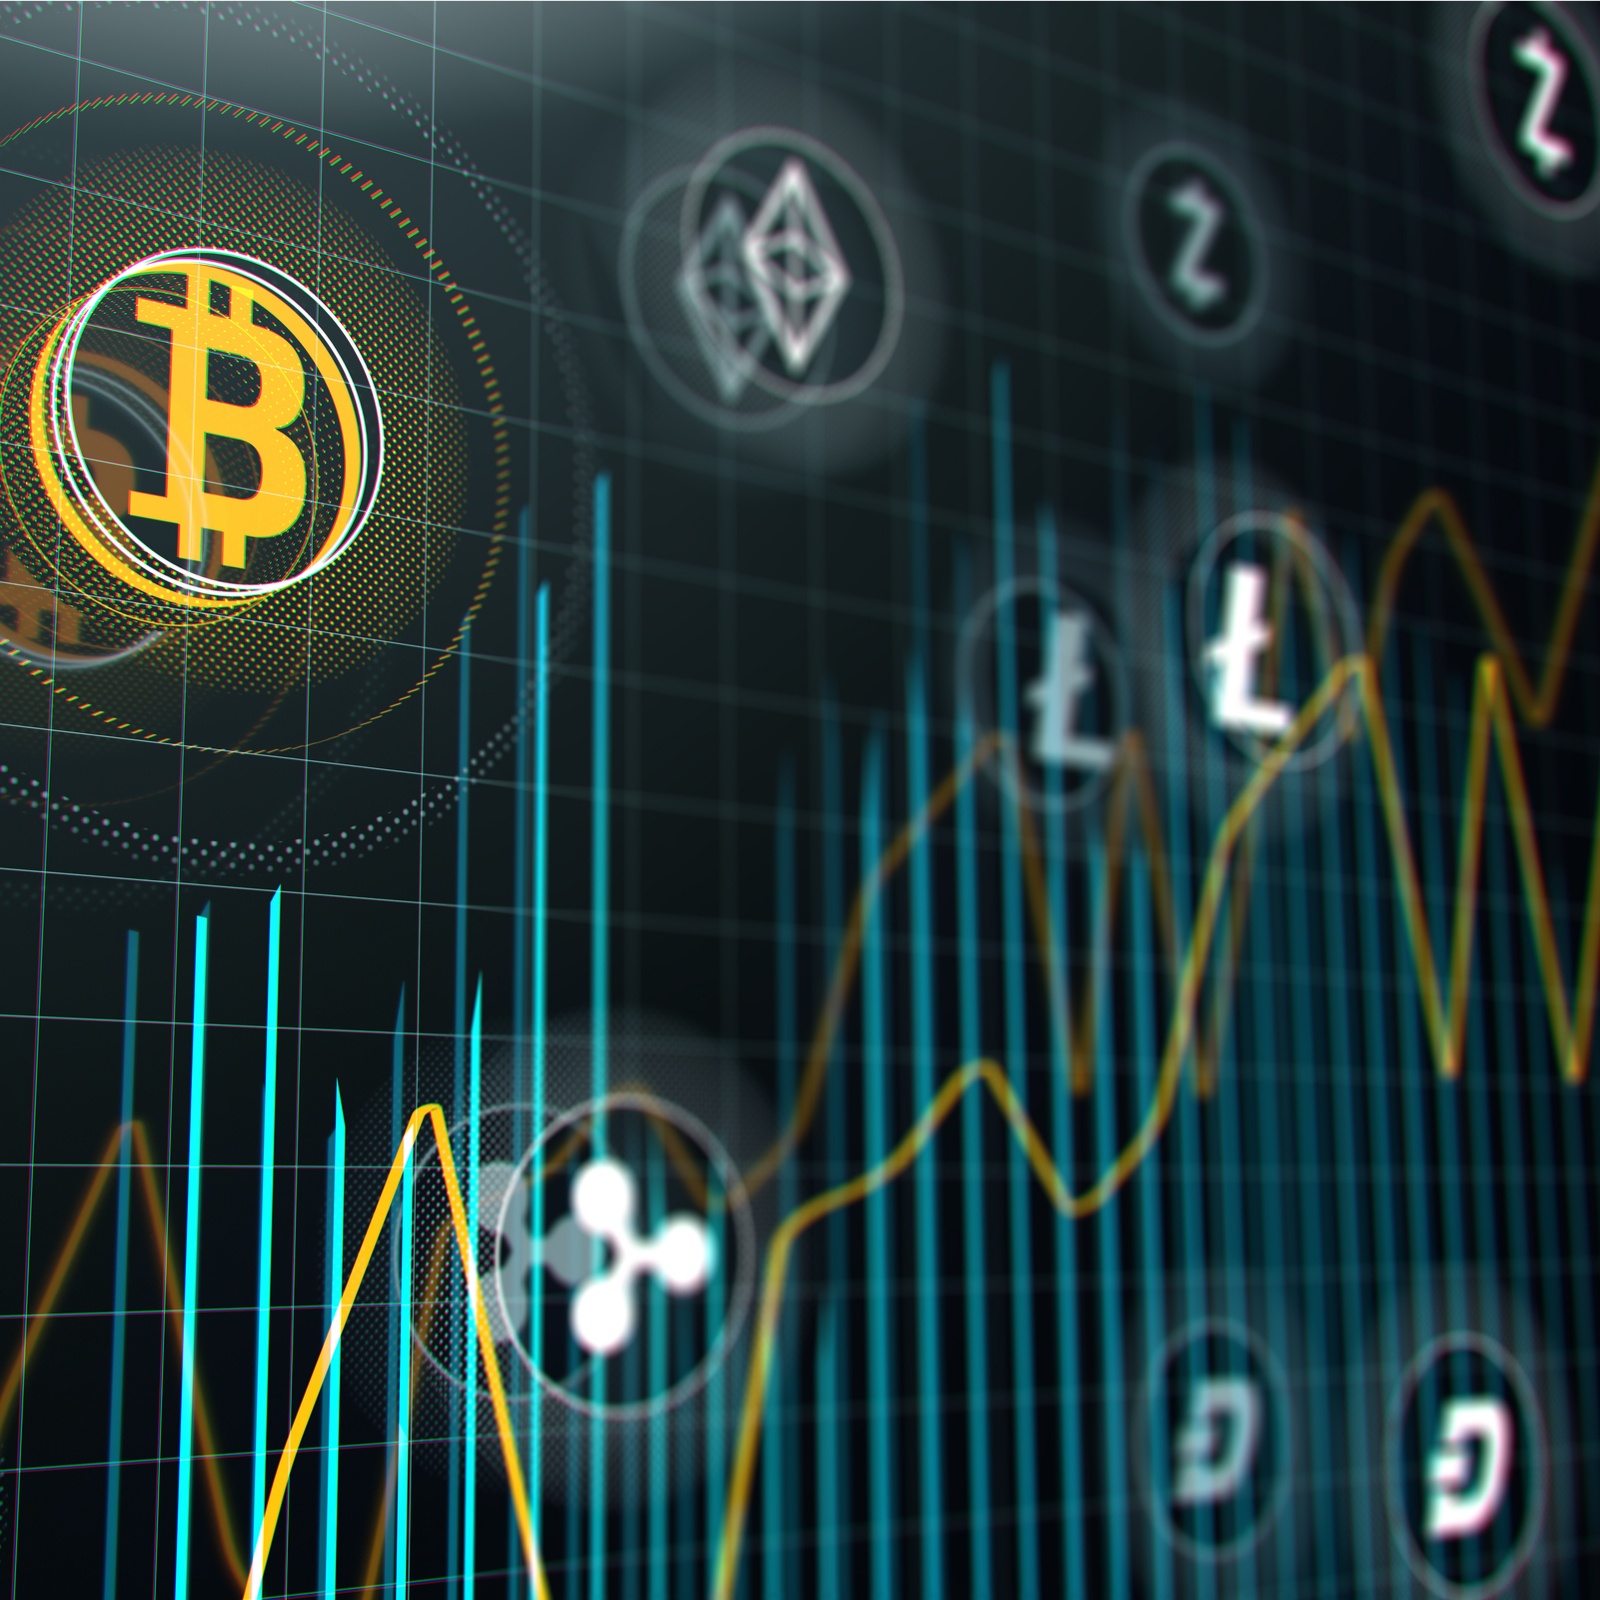 Bitwise Launches Three New Cryptocurrency Market Index Funds